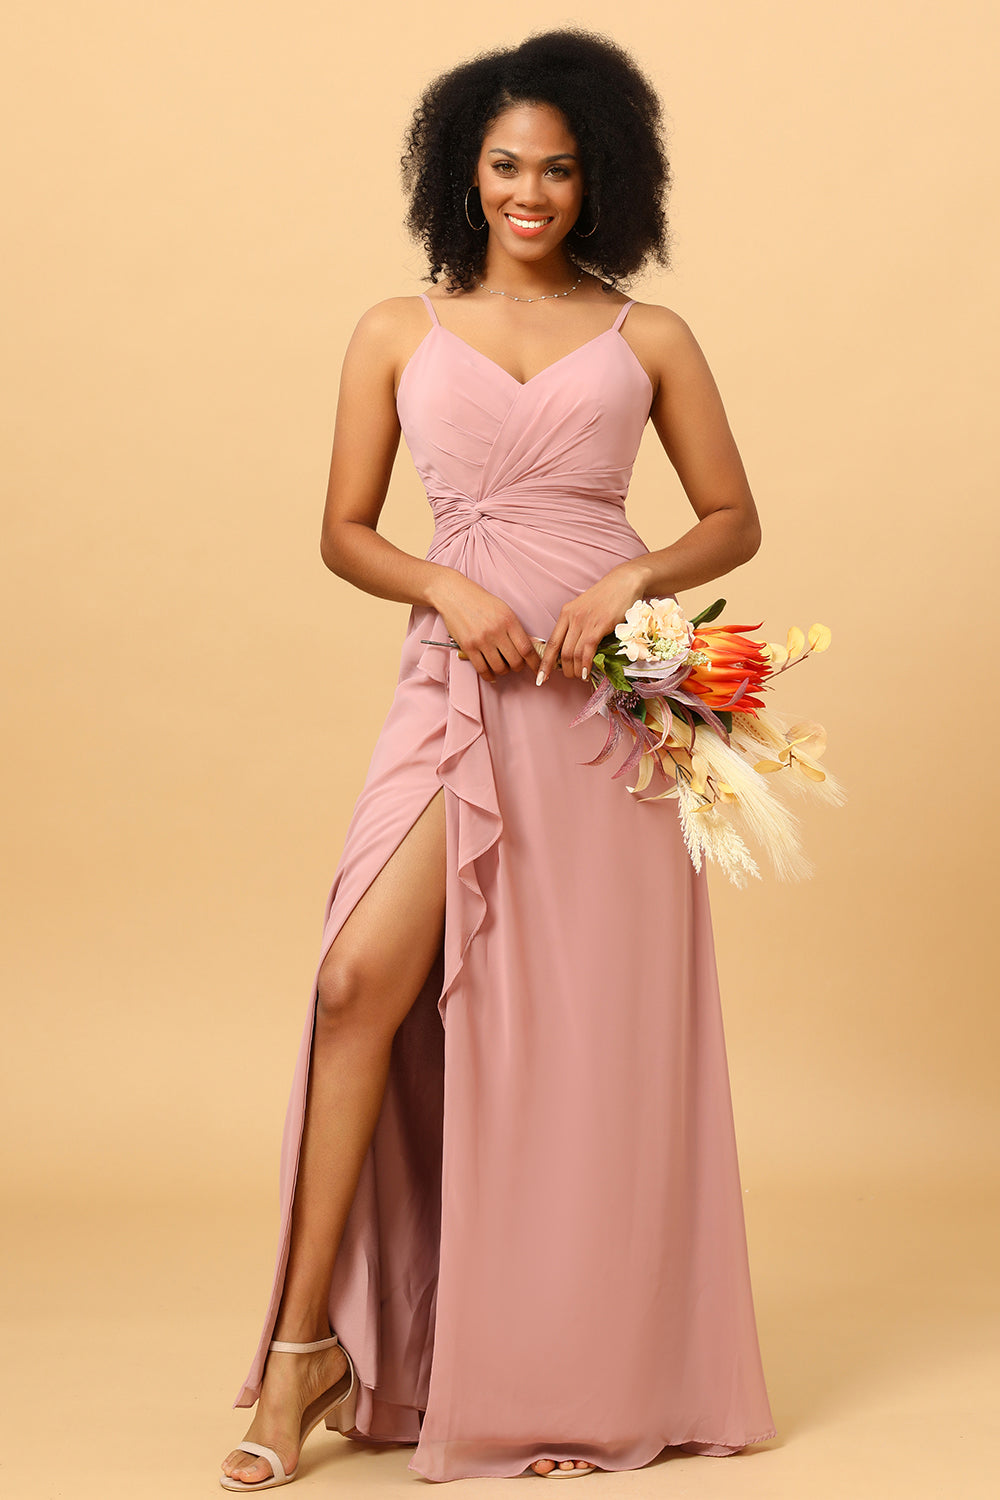 2022 Fall Mismatched Satin Copper Bridesmaid Dresses Modest, Elegant, And  Perfect For Weddings And Formal Events From Julia4444, $92.47 | DHgate.Com